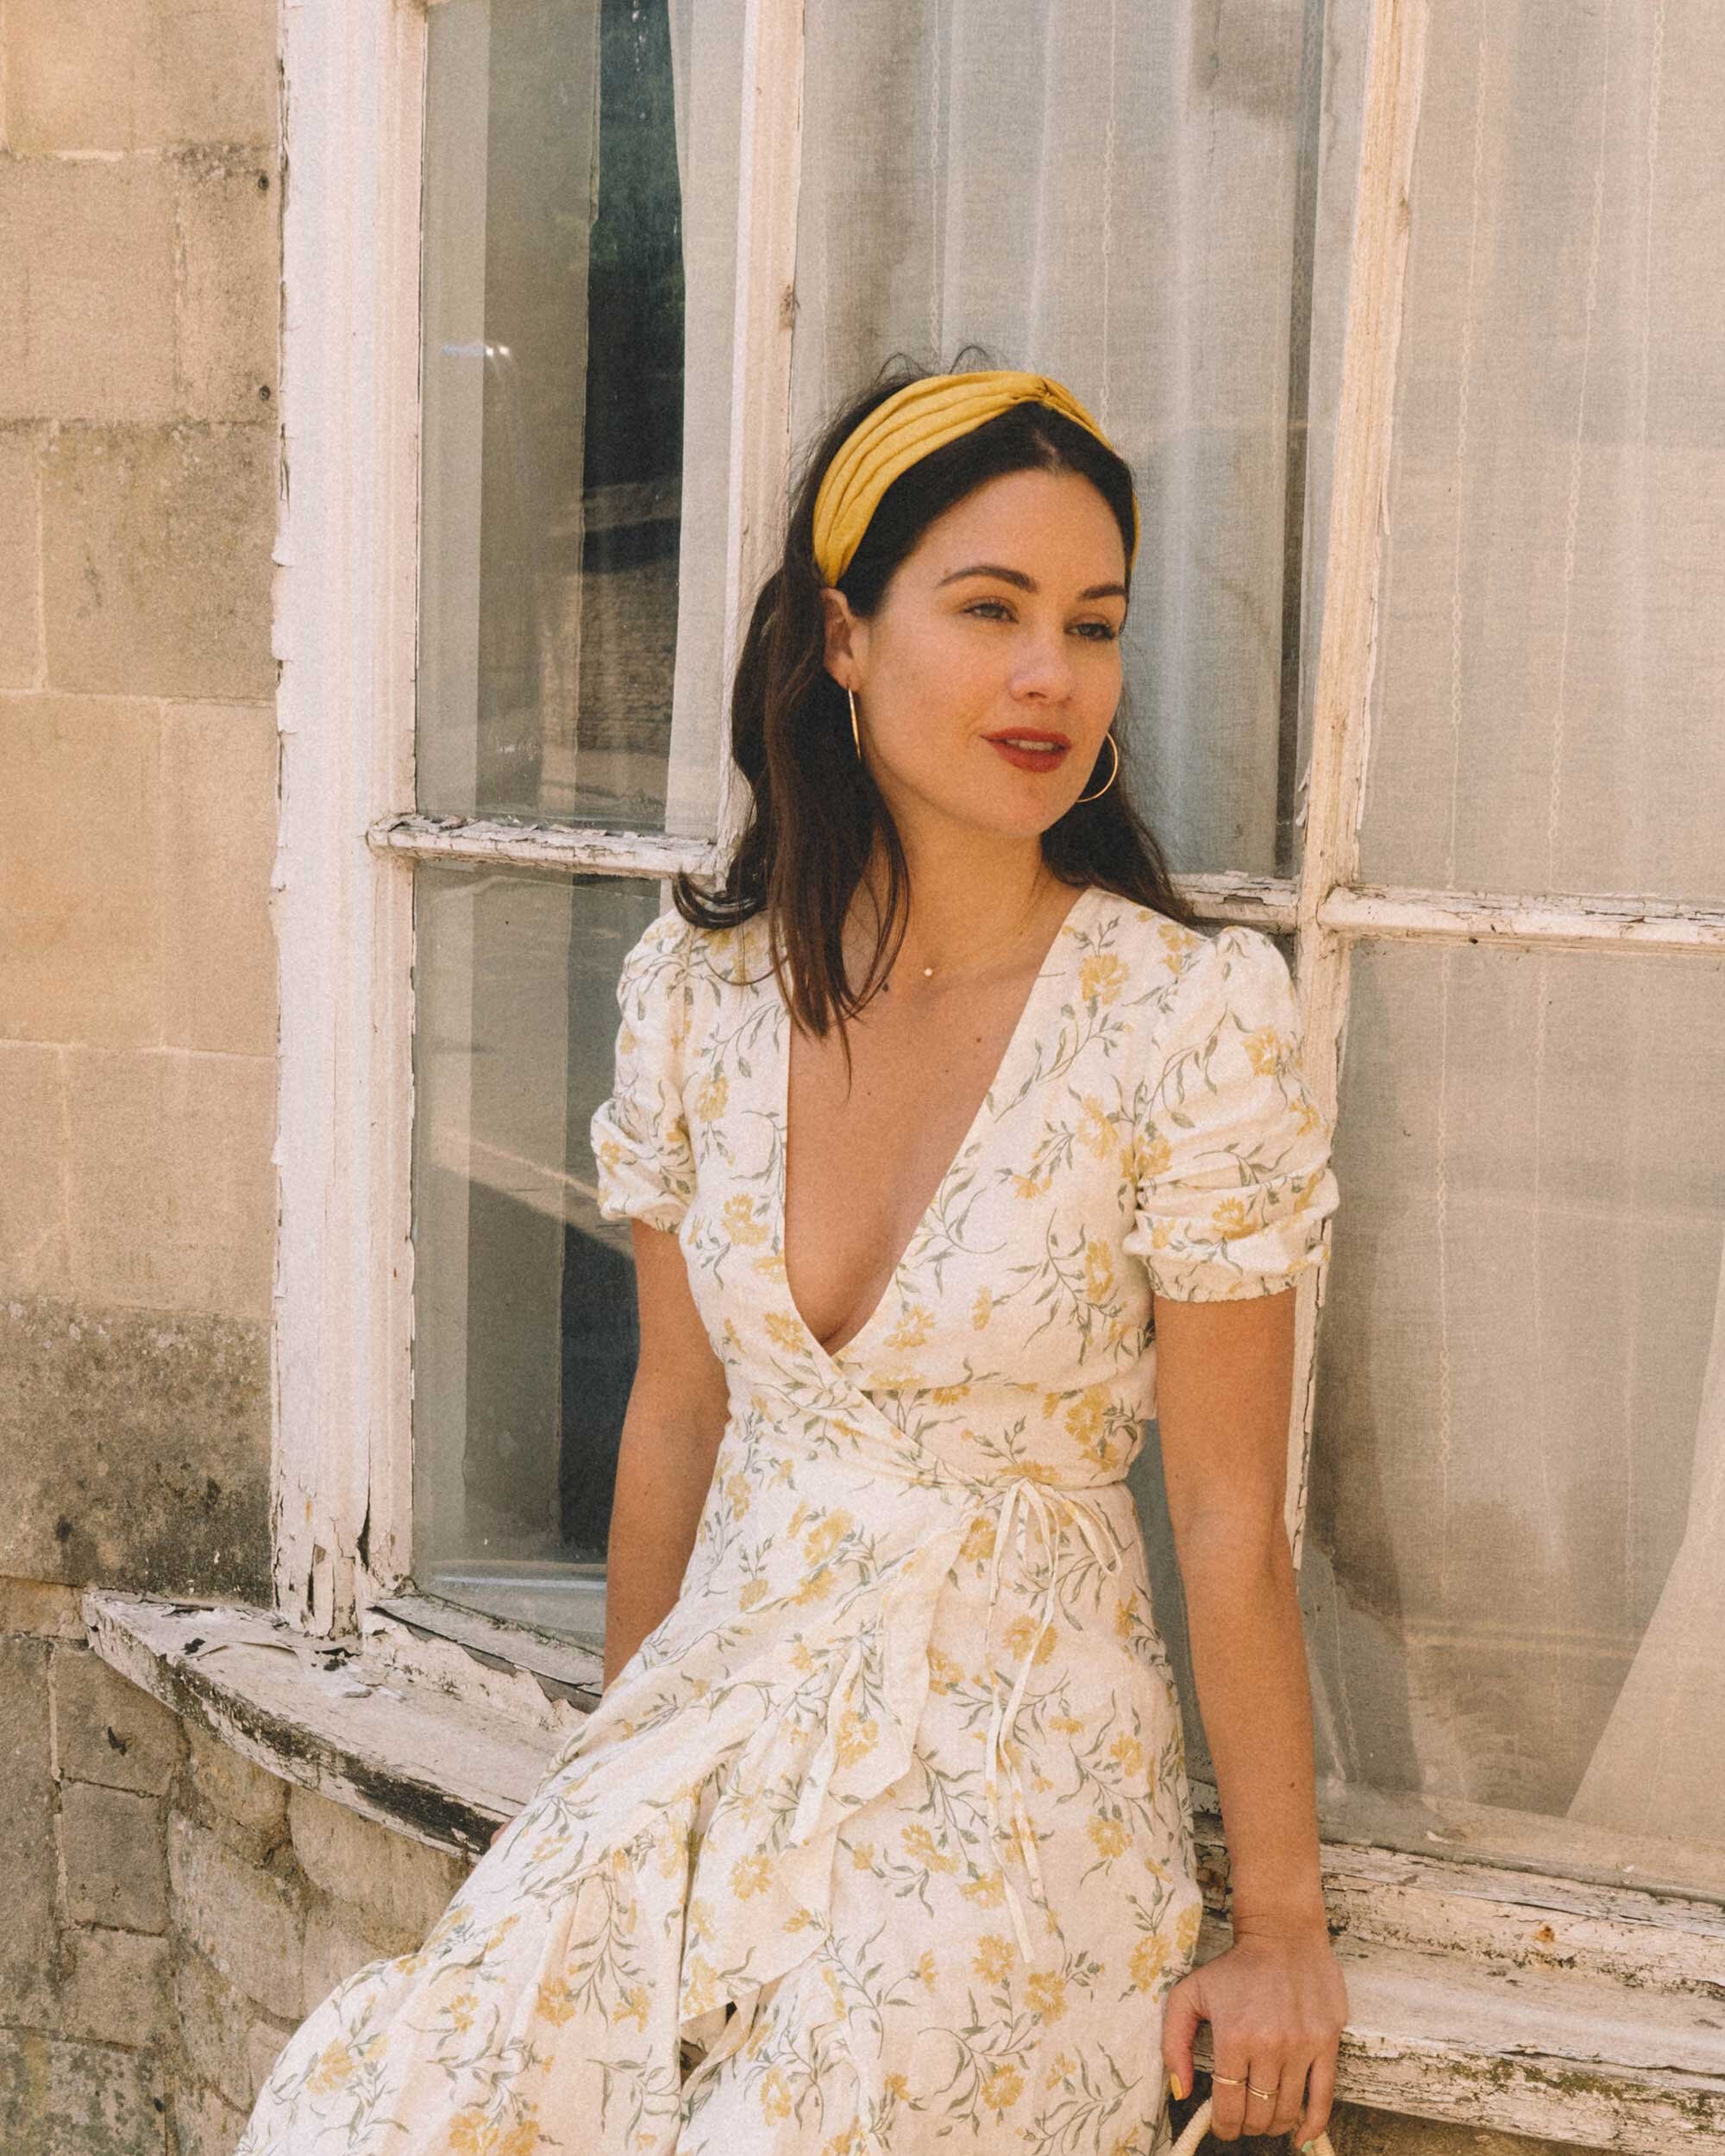 Sarah+Butler+of+Sarah+Styles+Seattle+wears+And+Other+Stories+Ruffled+Linen+Wrap+Midi+Dress+and+round+woven+bag+in+England+Countryside+for+the+perfect+floral+summer+dress+|+@sarahchristine+13-3.jpg